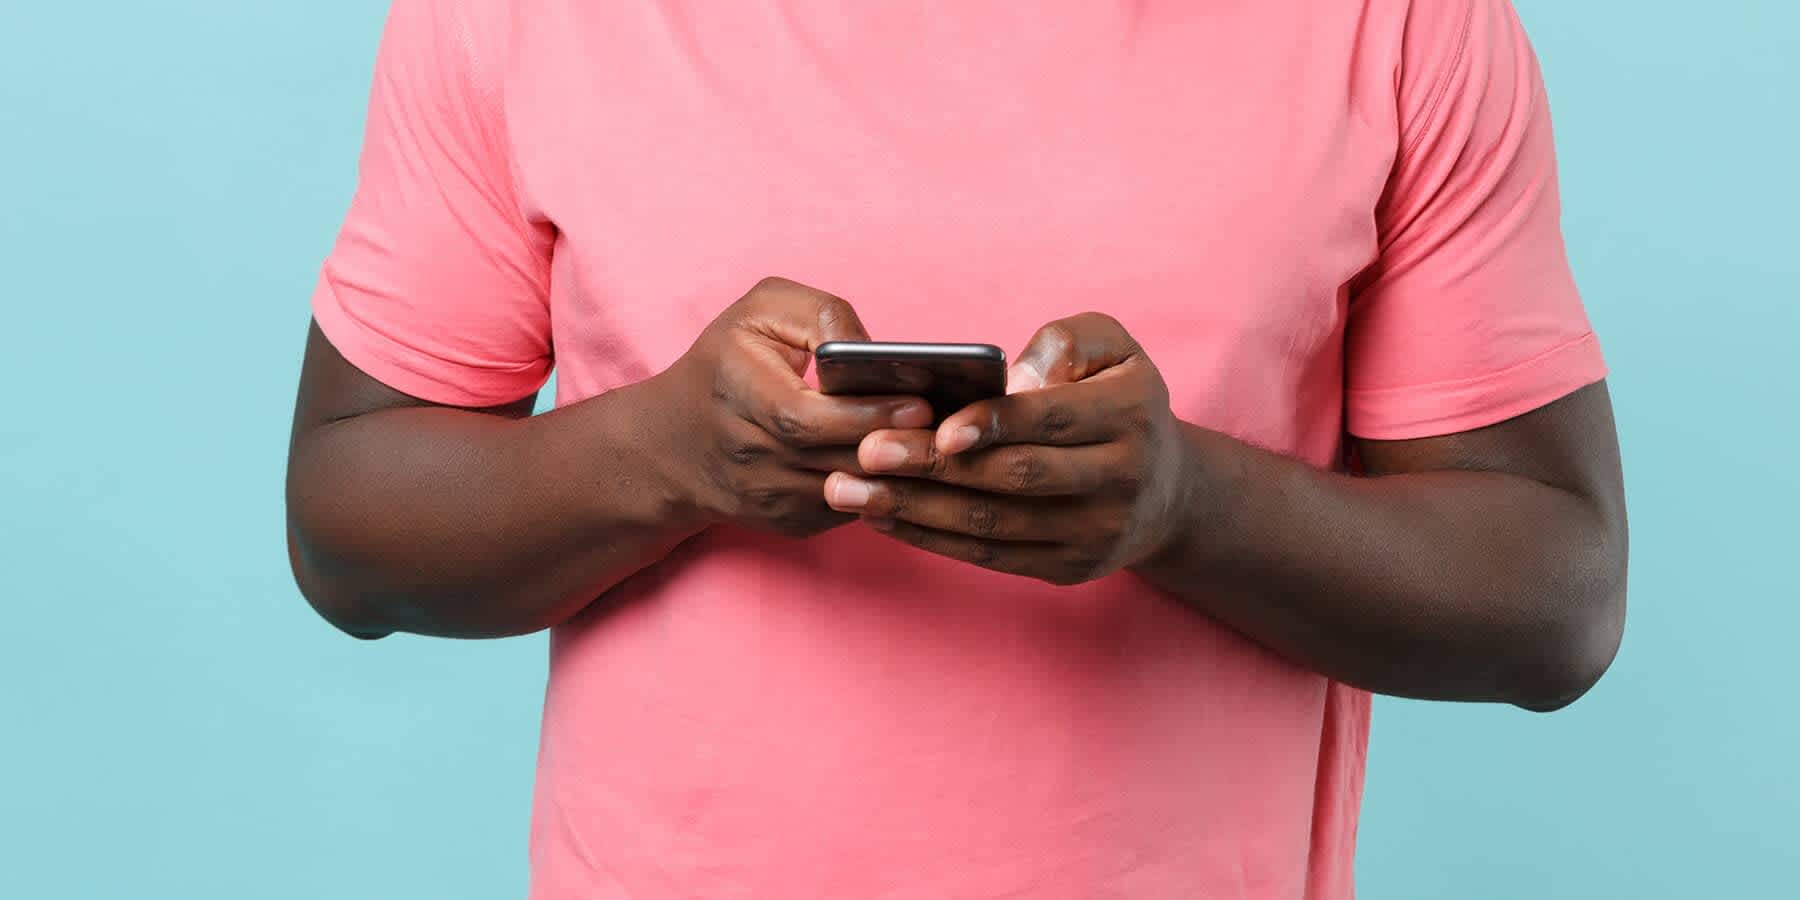 Man wearing pink shirt against a light blue background using mobile phone to look up syphilis tongue